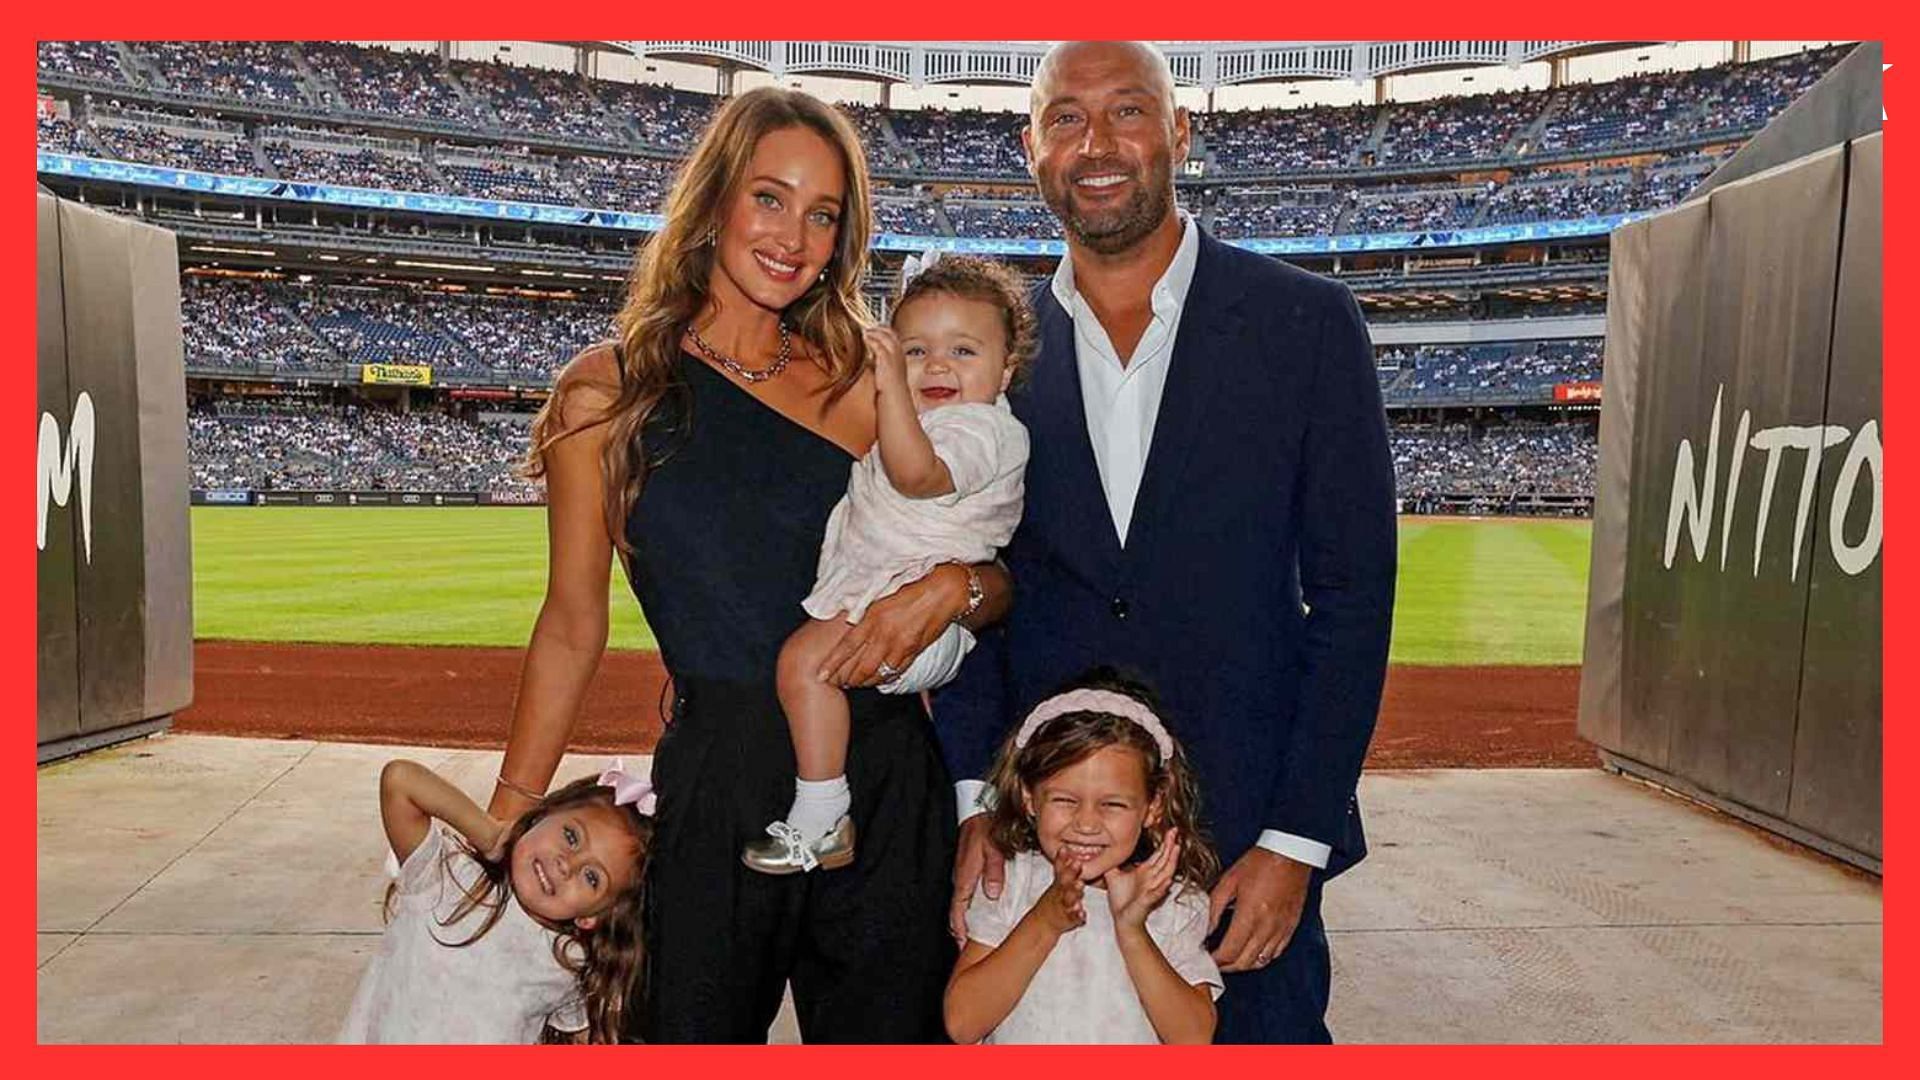 Derek Jeter and his wife Hannah Jeter, with their daughters